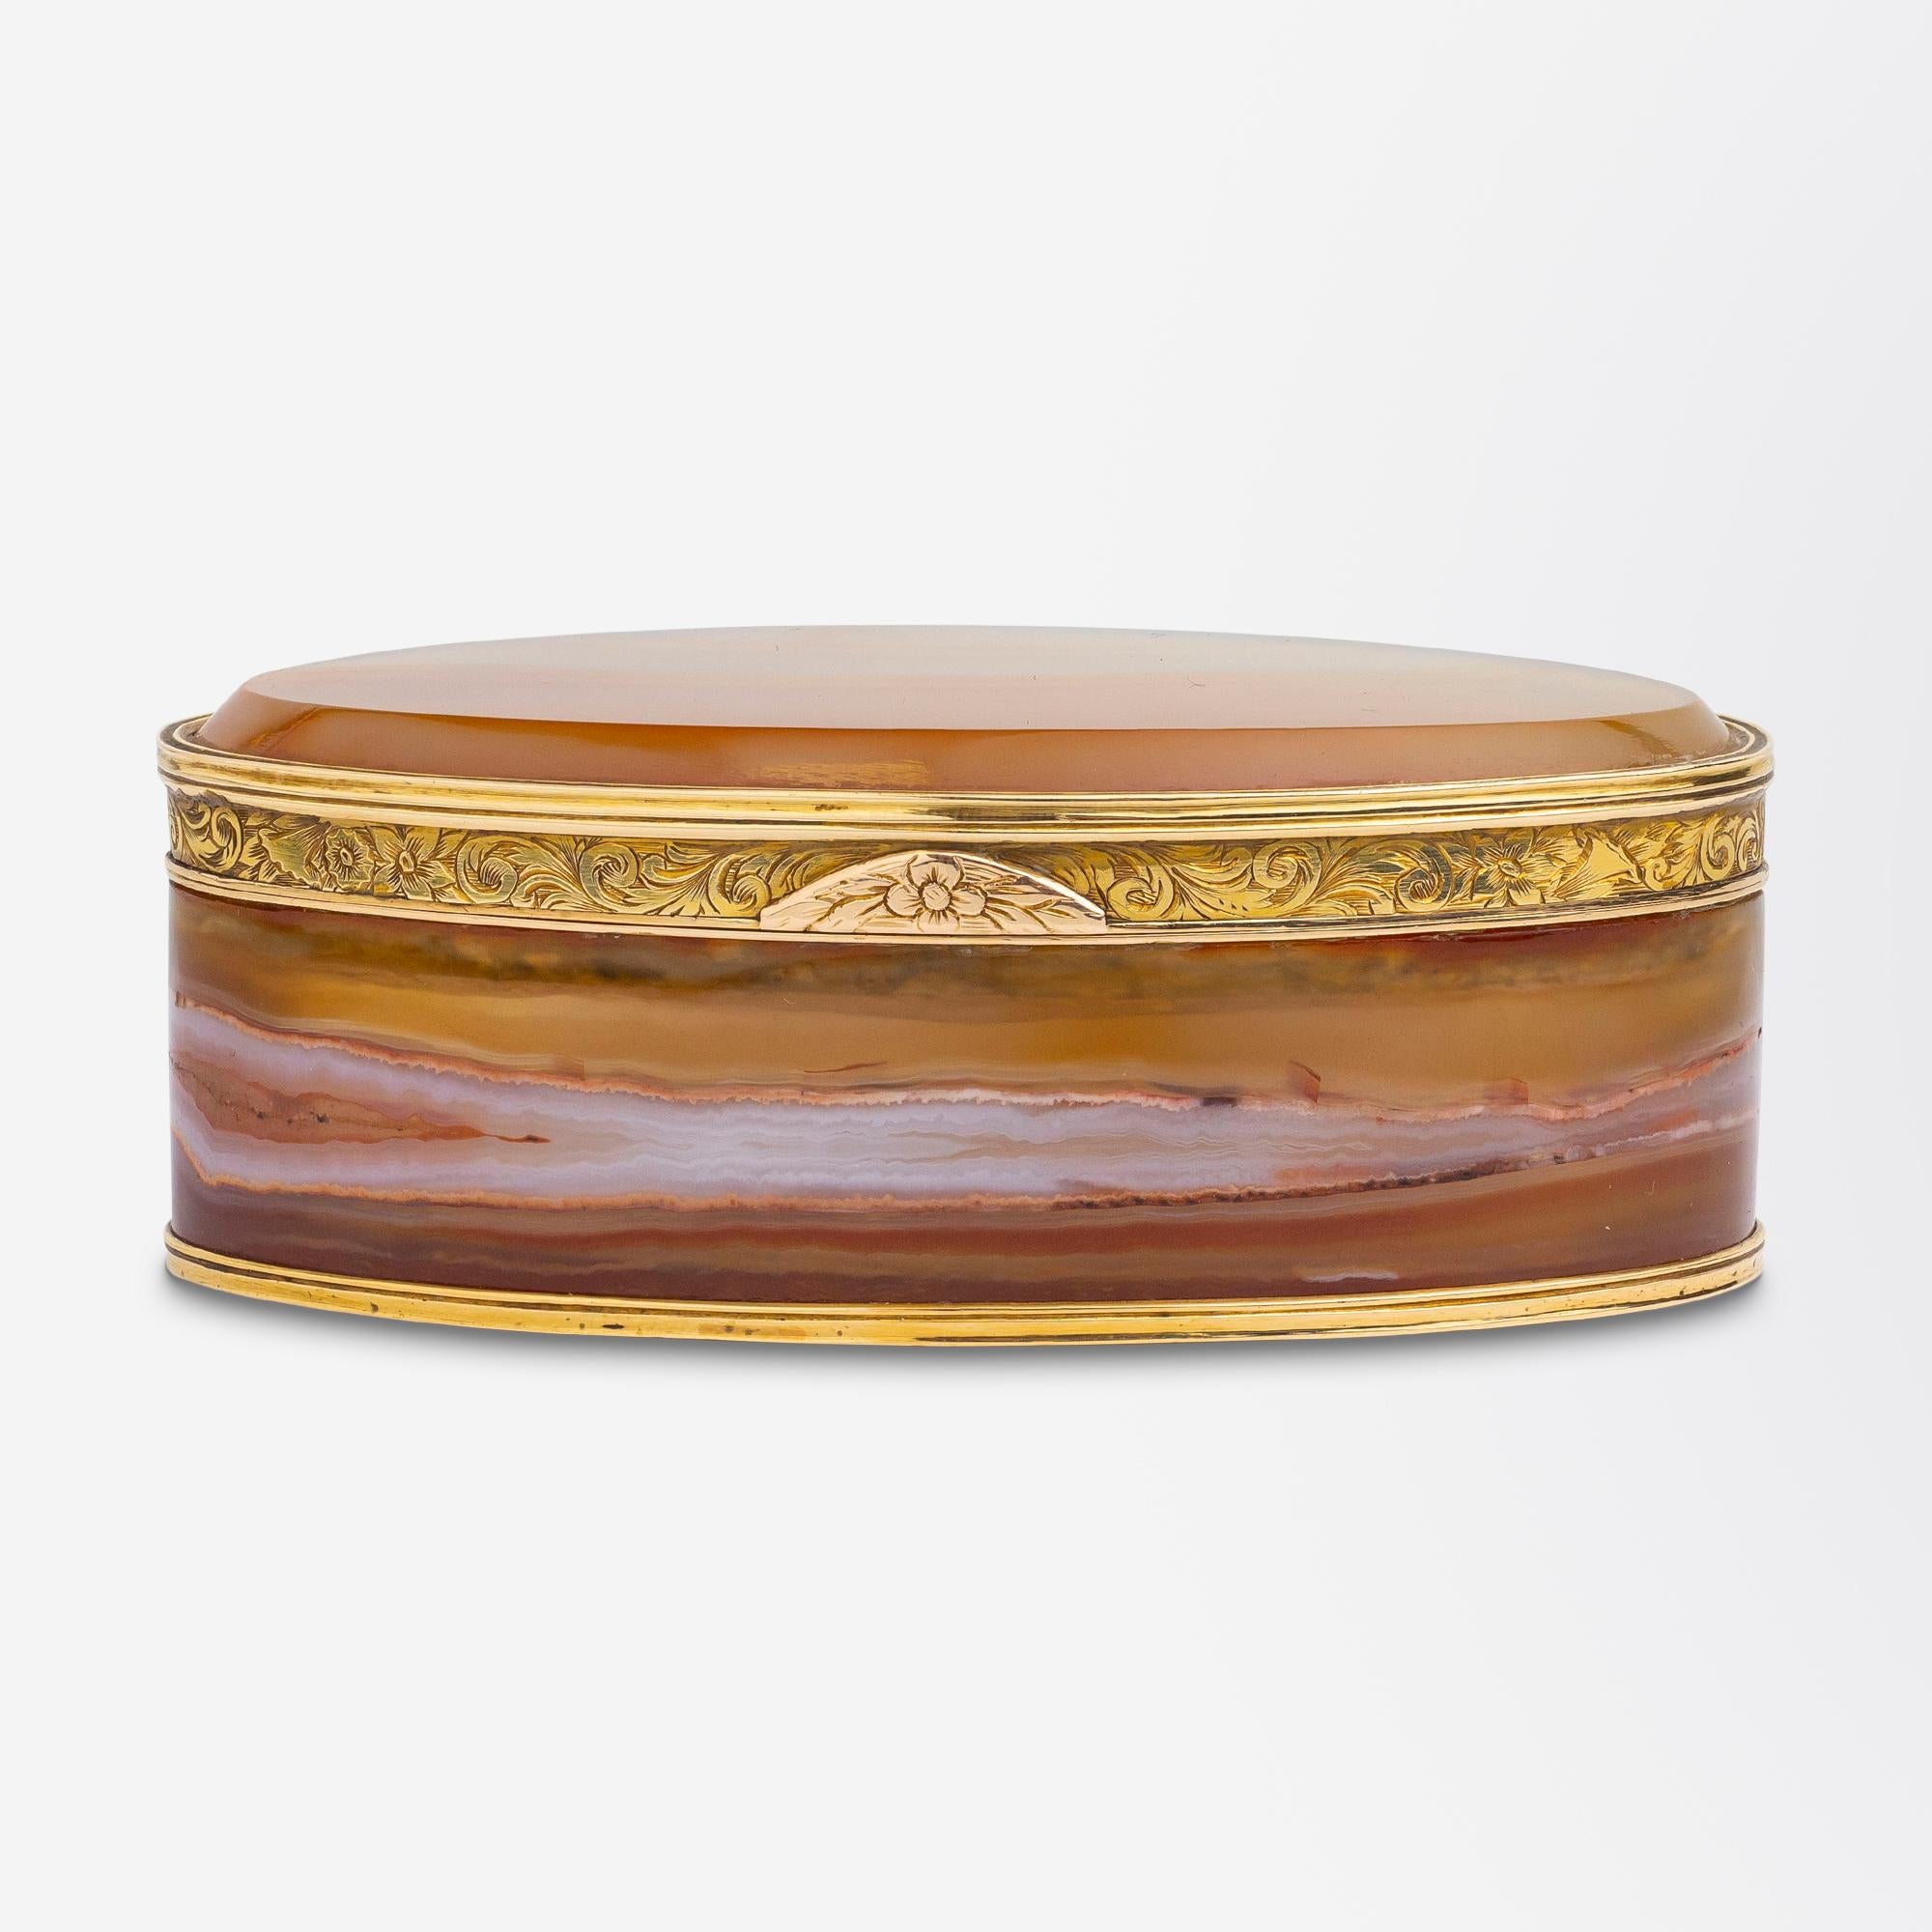 Uncut Oval Carnelian Agate Box With Gold Mounts